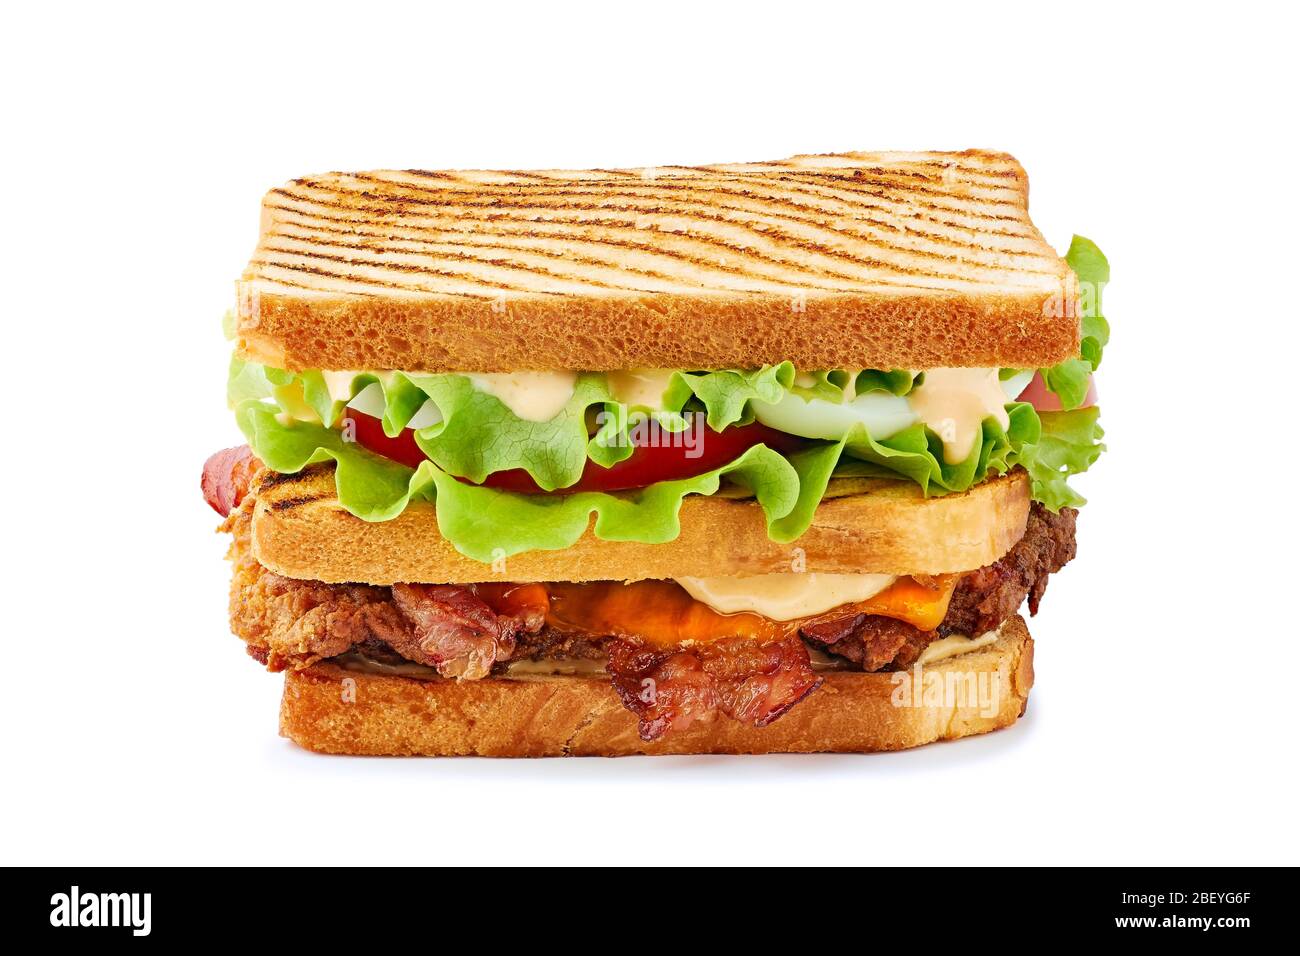 Juicy club sandwich with chicken and bacon on white Stock Photo